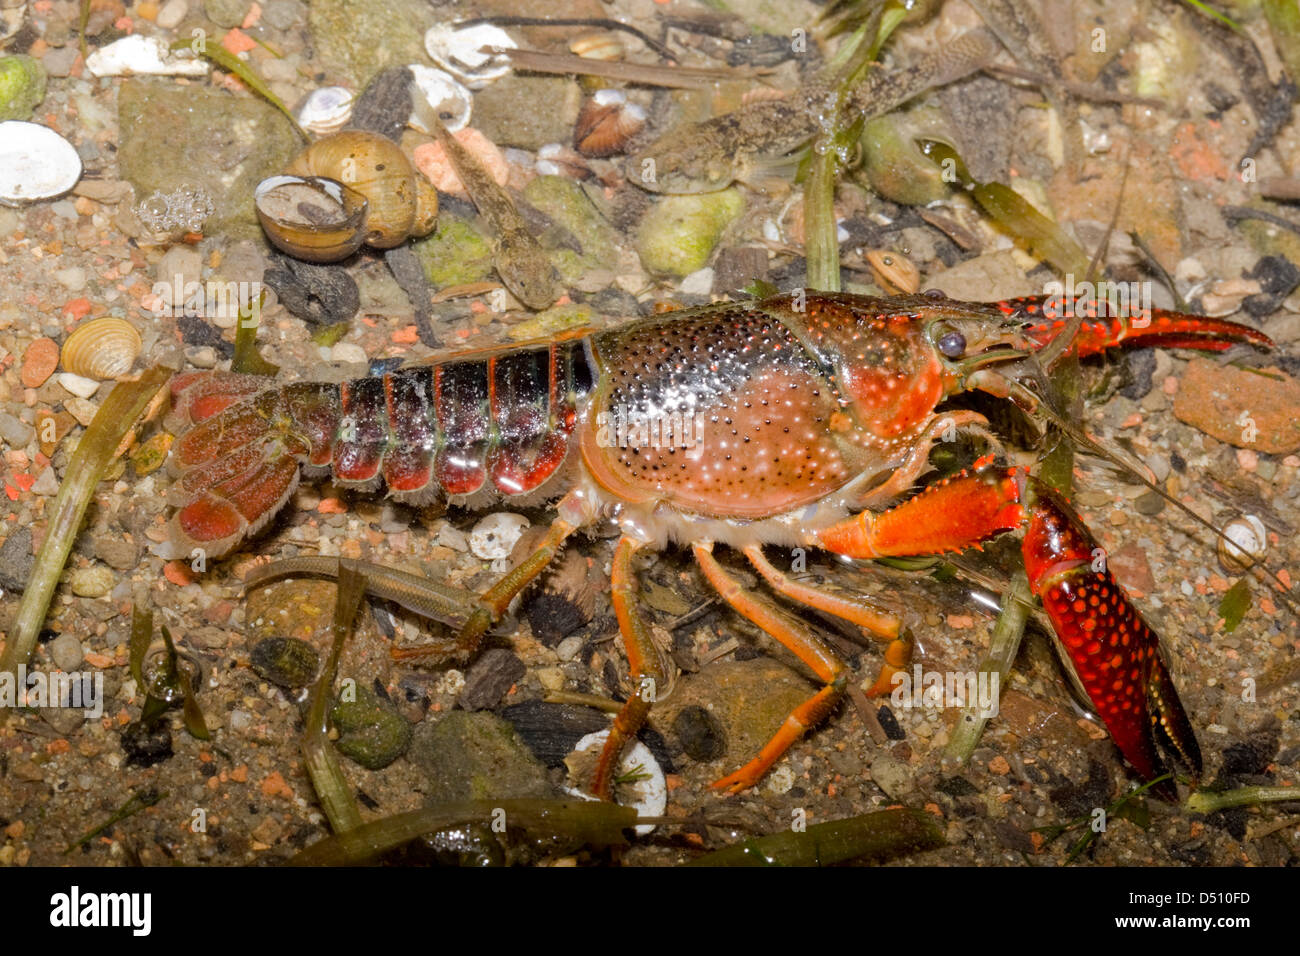 Procambarus clarkii,Louisiana crayfish adult in shallow water side view Stock Photo